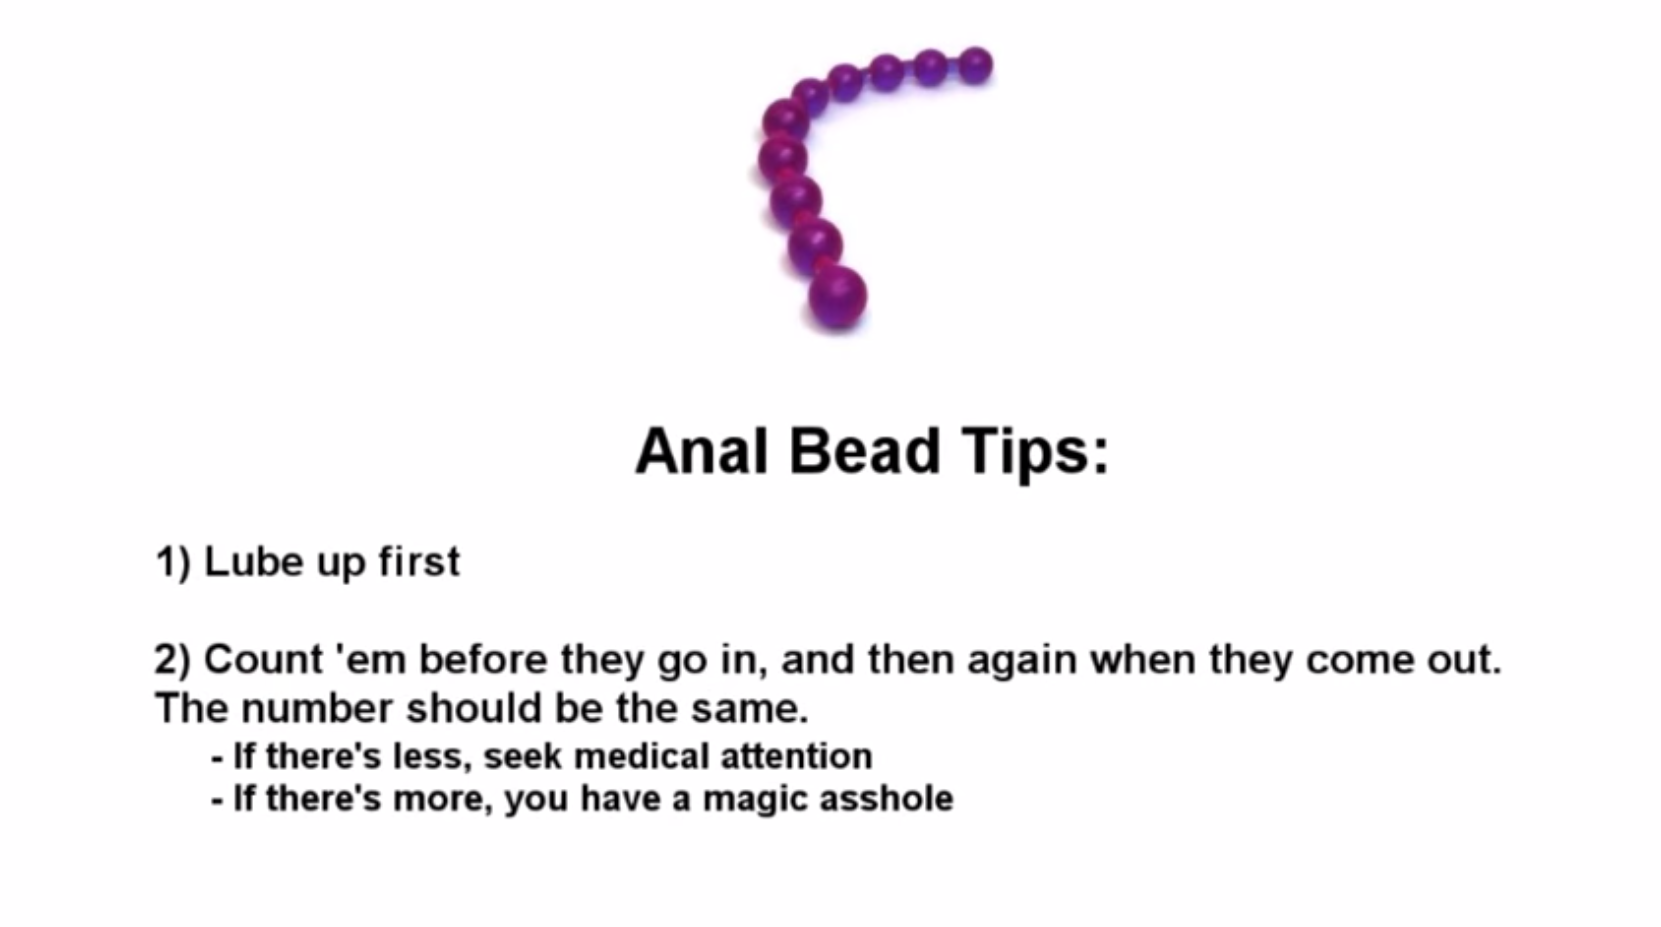 anal beads magic asshole - Anal Bead Tips 1 Lube up first 2 Count 'em before they go in, and then again when they come out. The number should be the same. If there's less, seek medical attention If there's more, you have a magic asshole